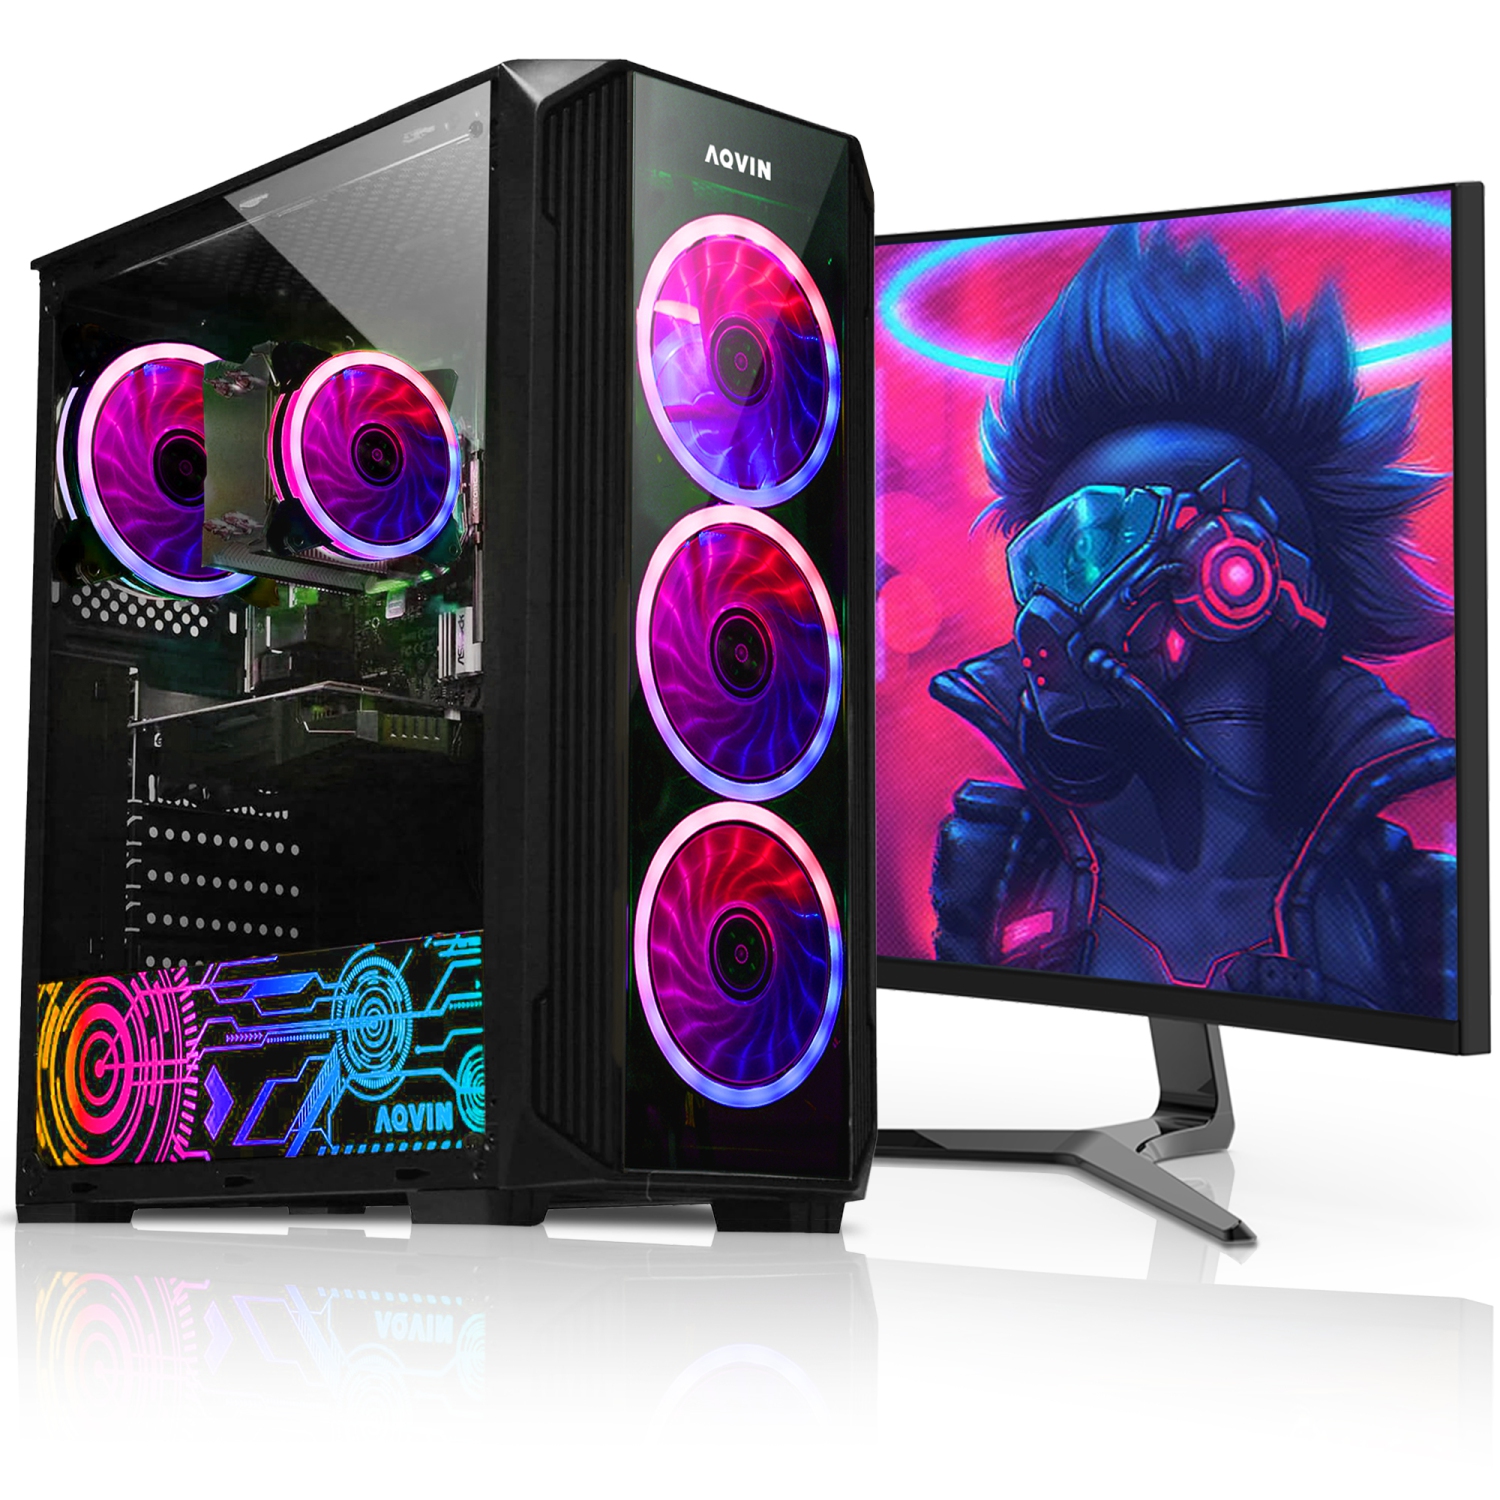 Refurbished (Excellent) - AQVIN ZForce Tower Gaming PC with New 27-inch Curved Gaming Monitor| AMD Radeon RX 580 8GB (HDMI)| Intel Core i7| 32GB RAM| 2TB SSD| Windows 10 Pro| WIFI